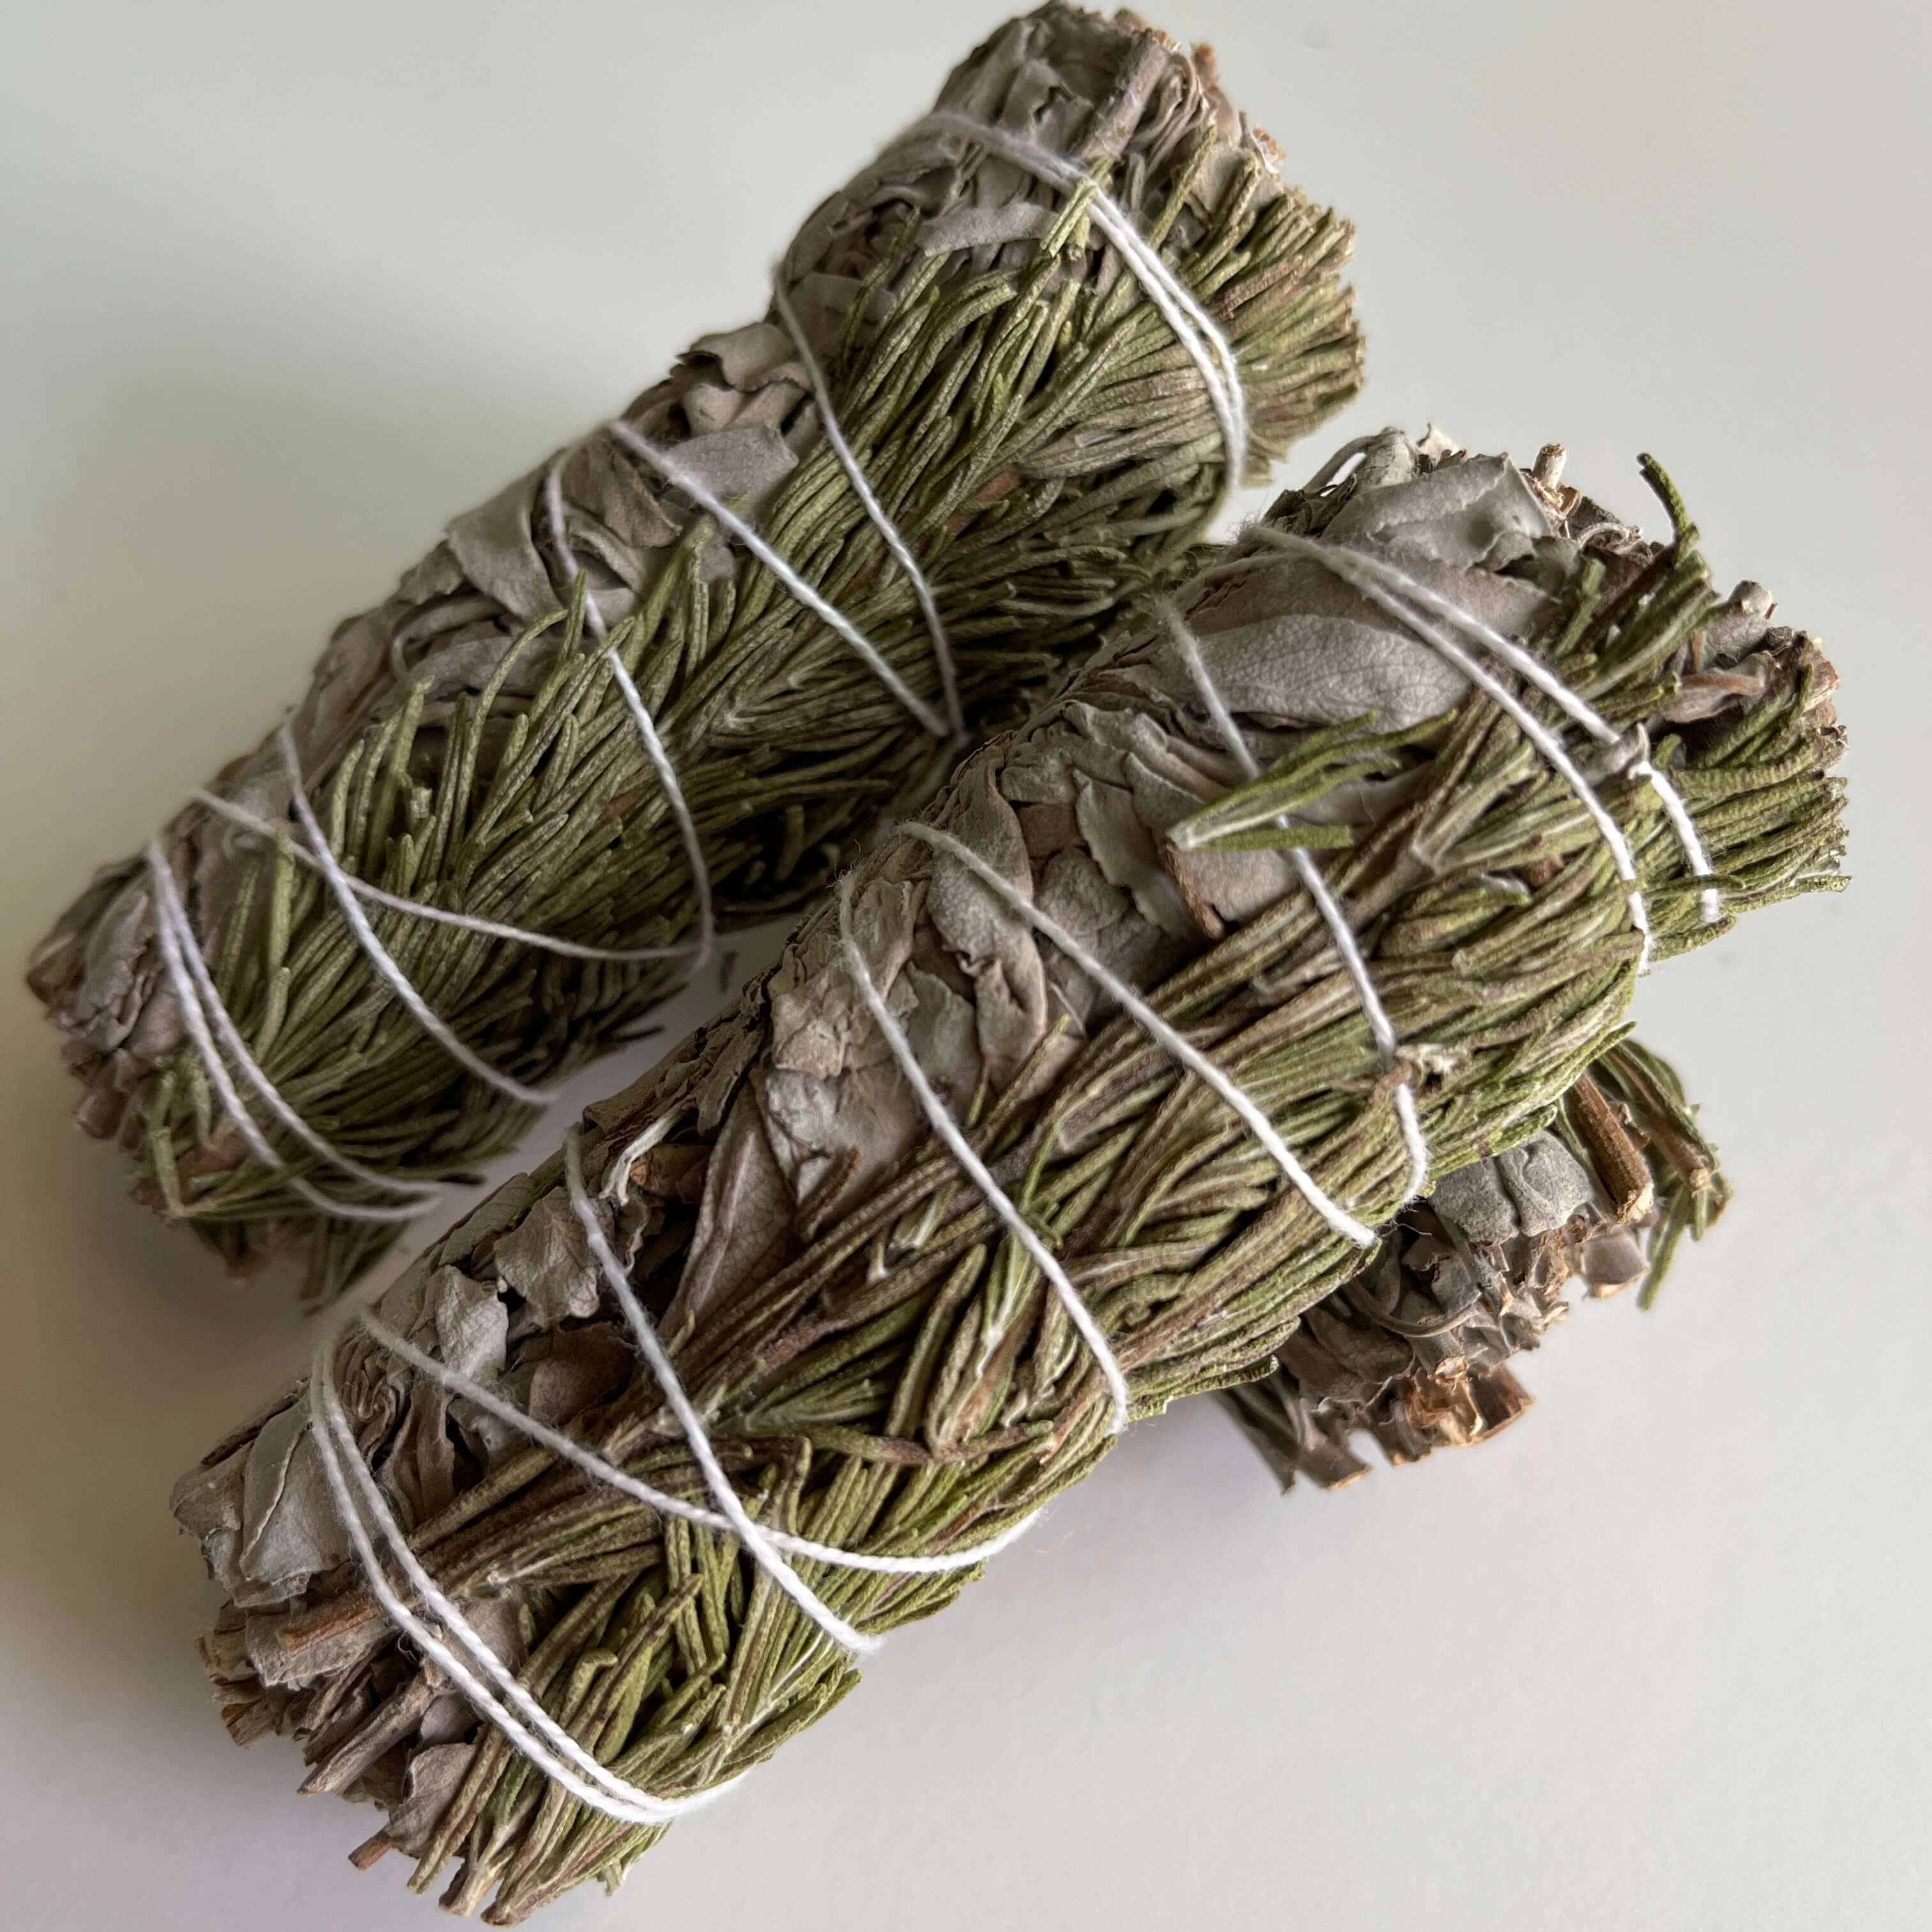 3 Smudge sticks of White Sage with Rosemary 4 Inch 